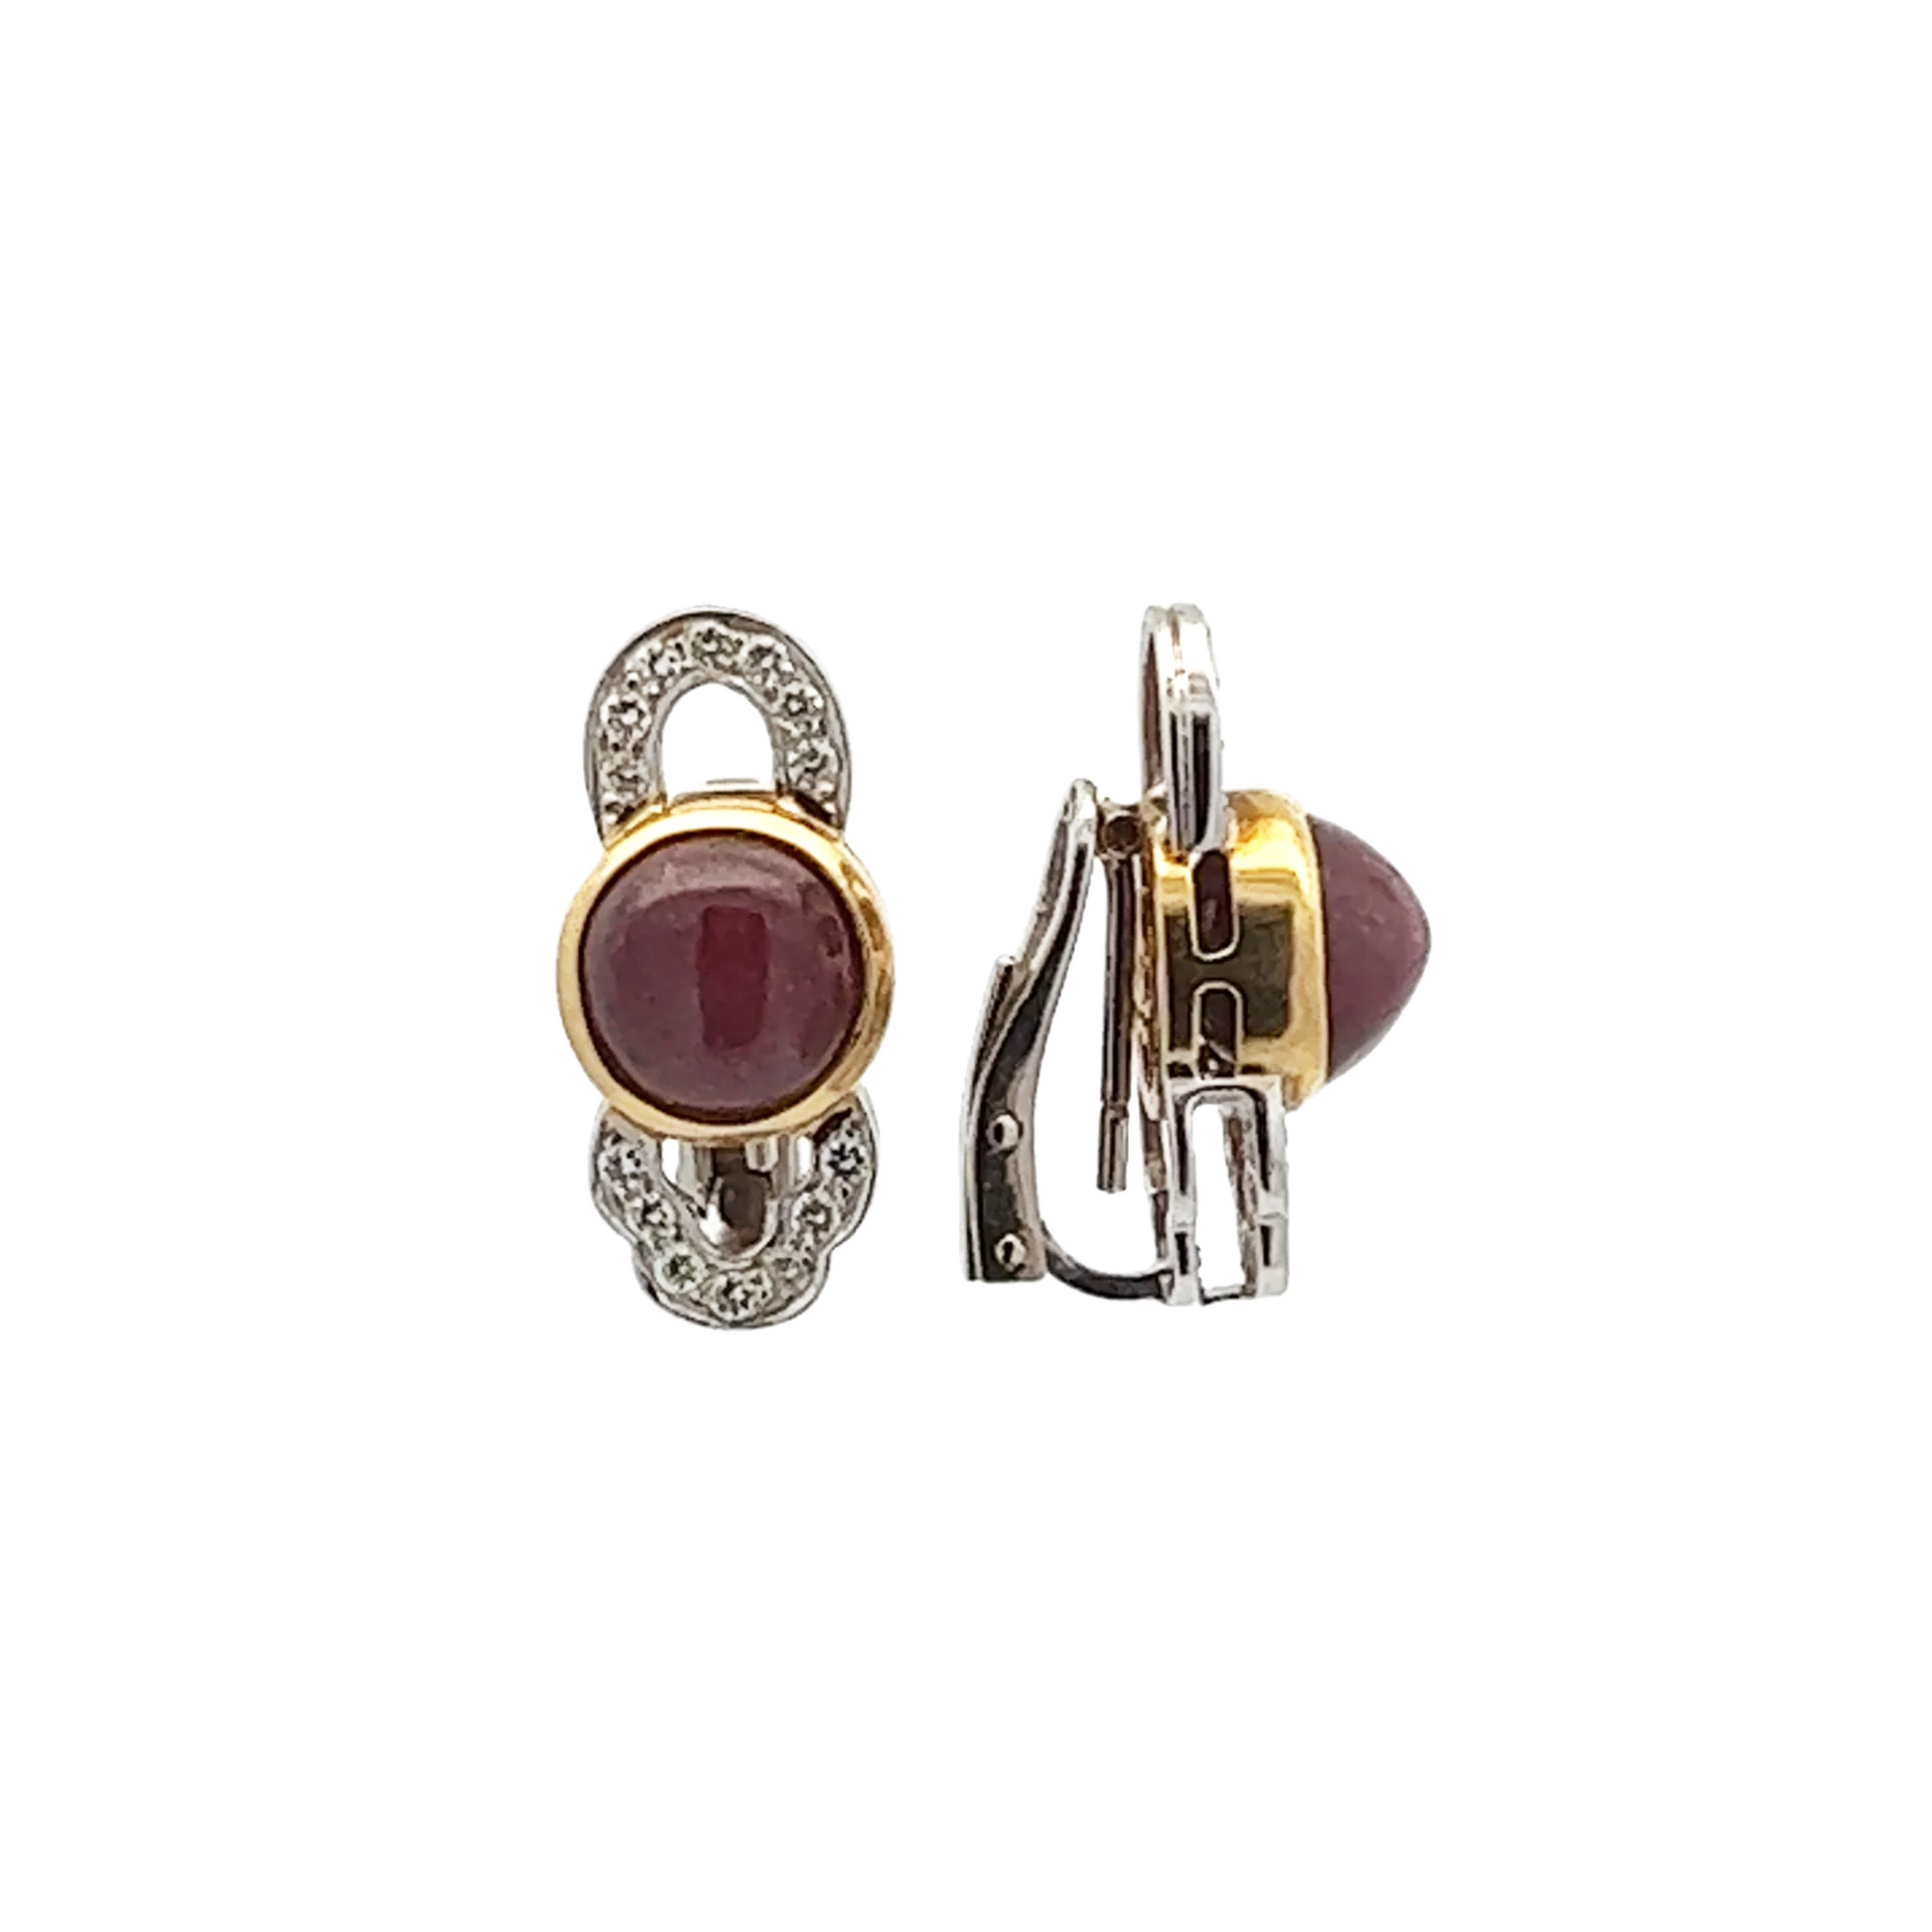 1980s 14KT Yellow & White Gold Ruby & Diamond Earrings front and side